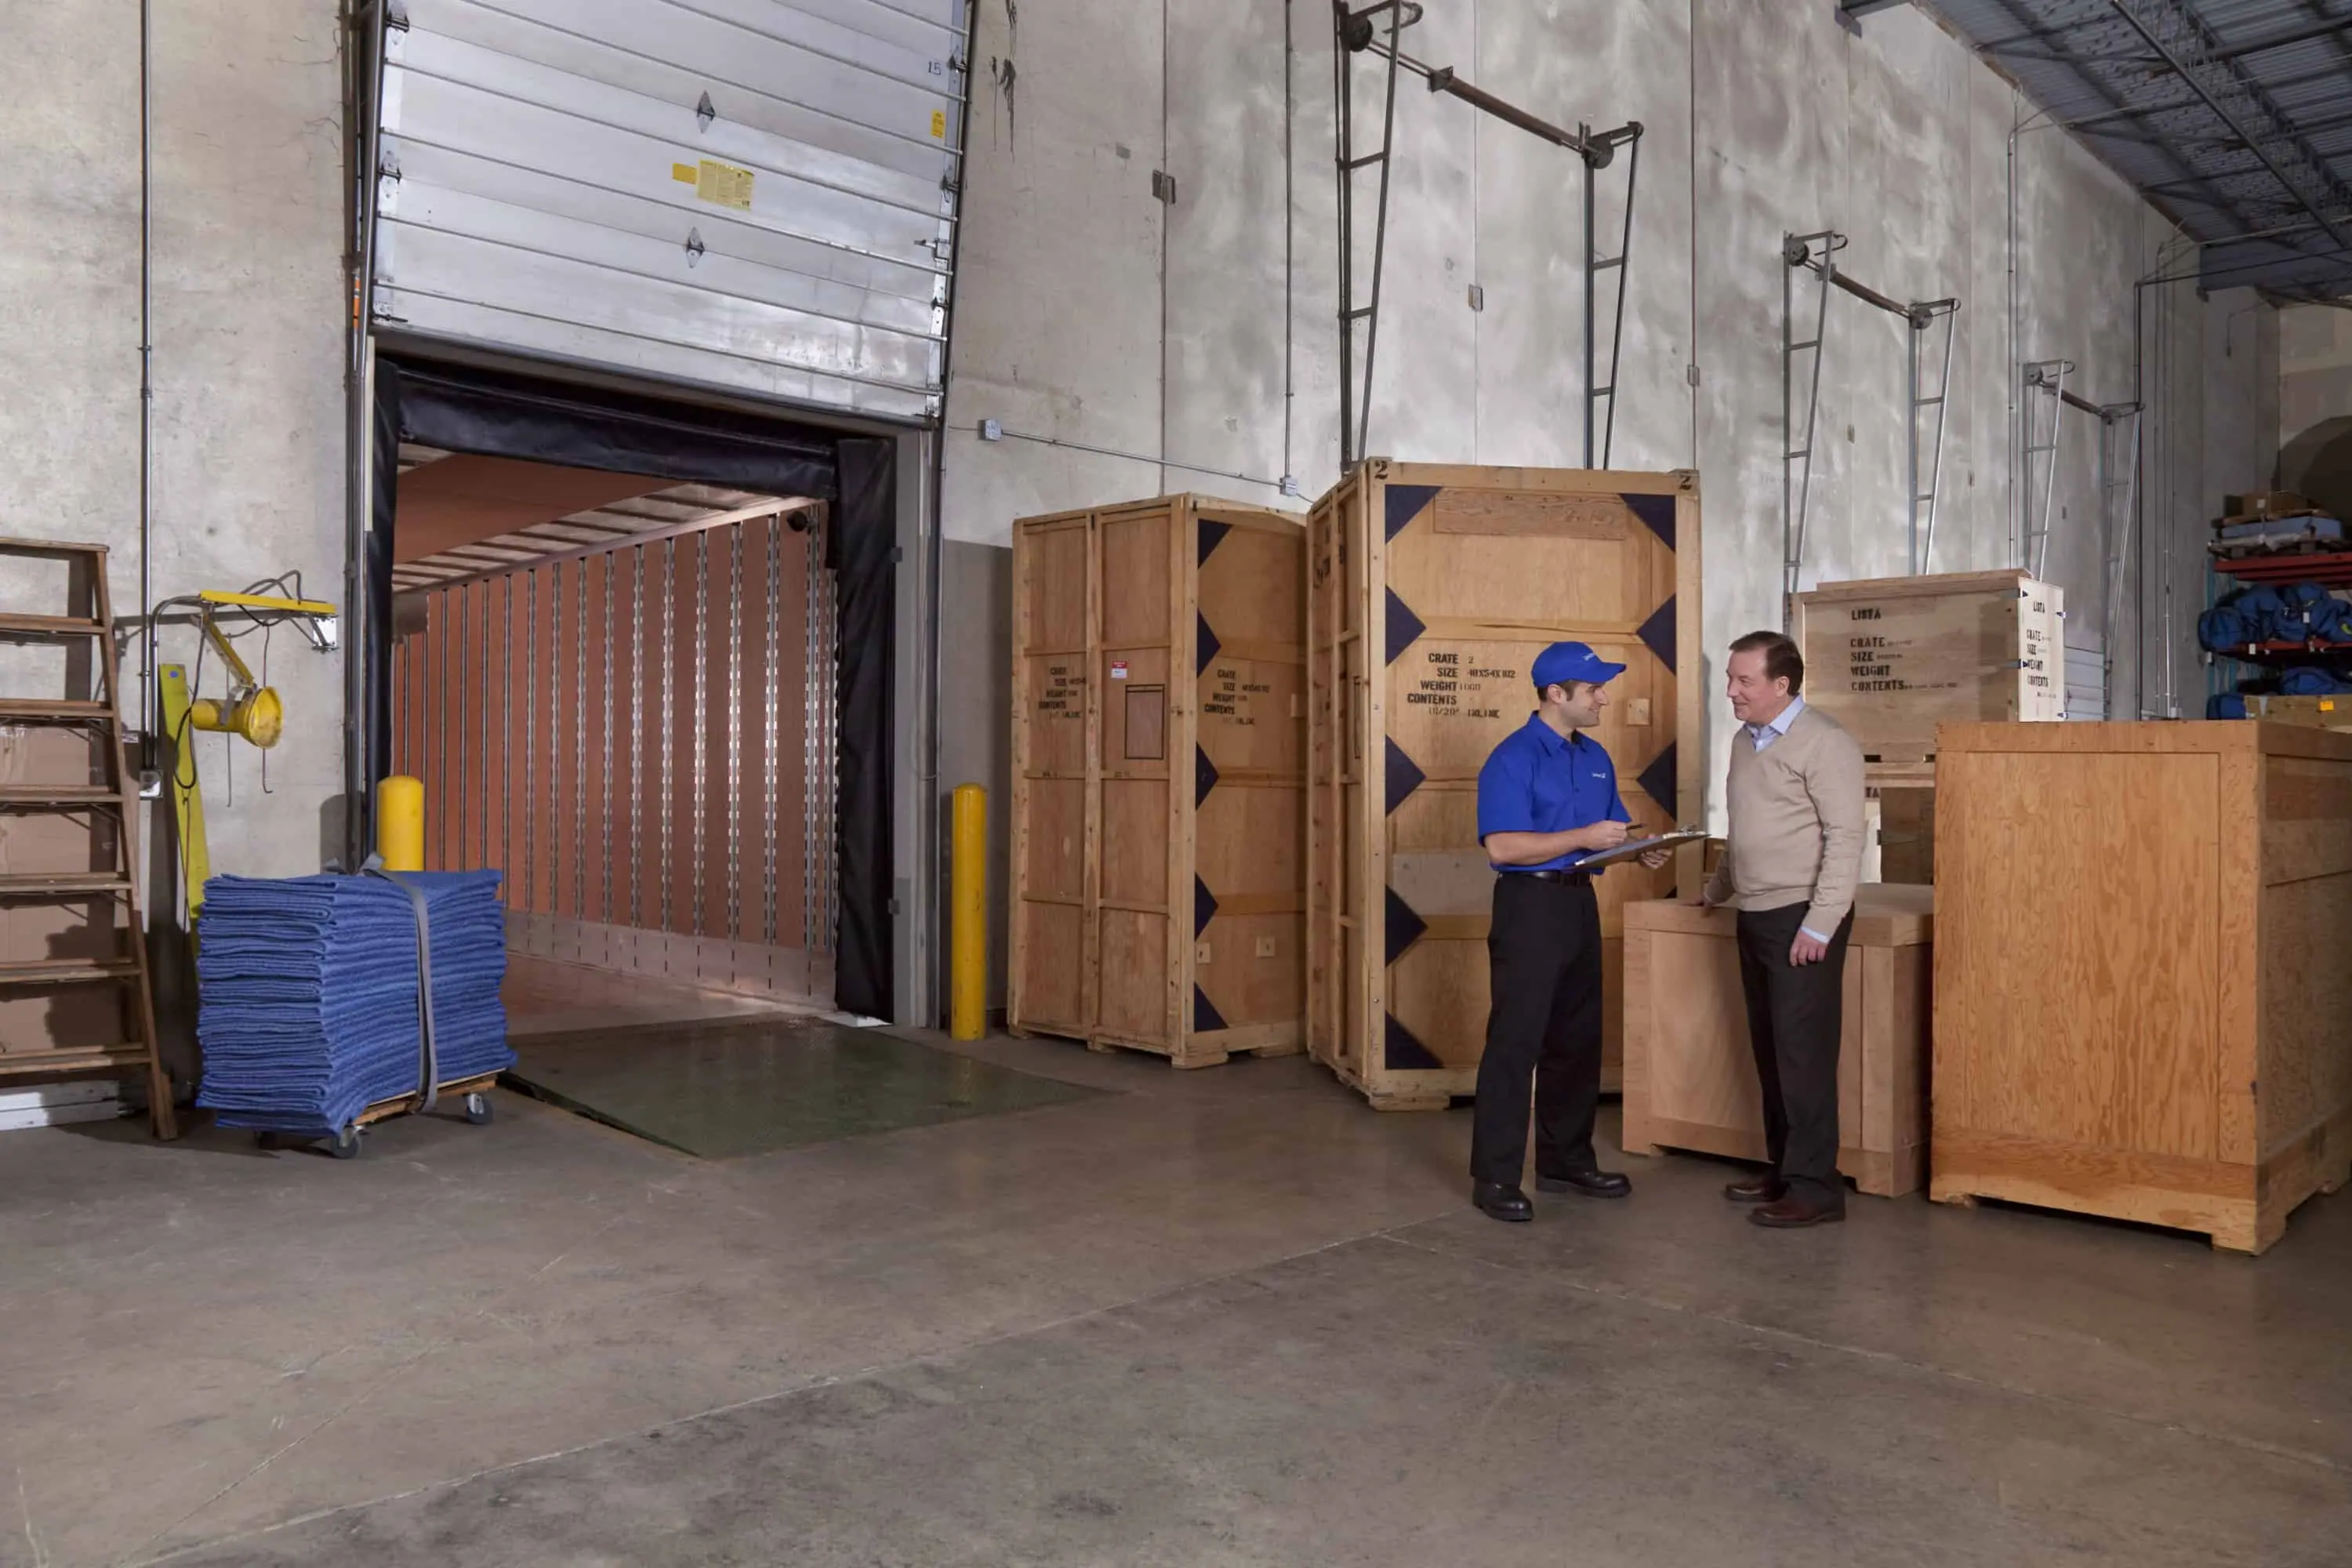 Logistics Company - United worker speaking to a customer in a warehouse with crates and a loading door in the background- United Van Lines